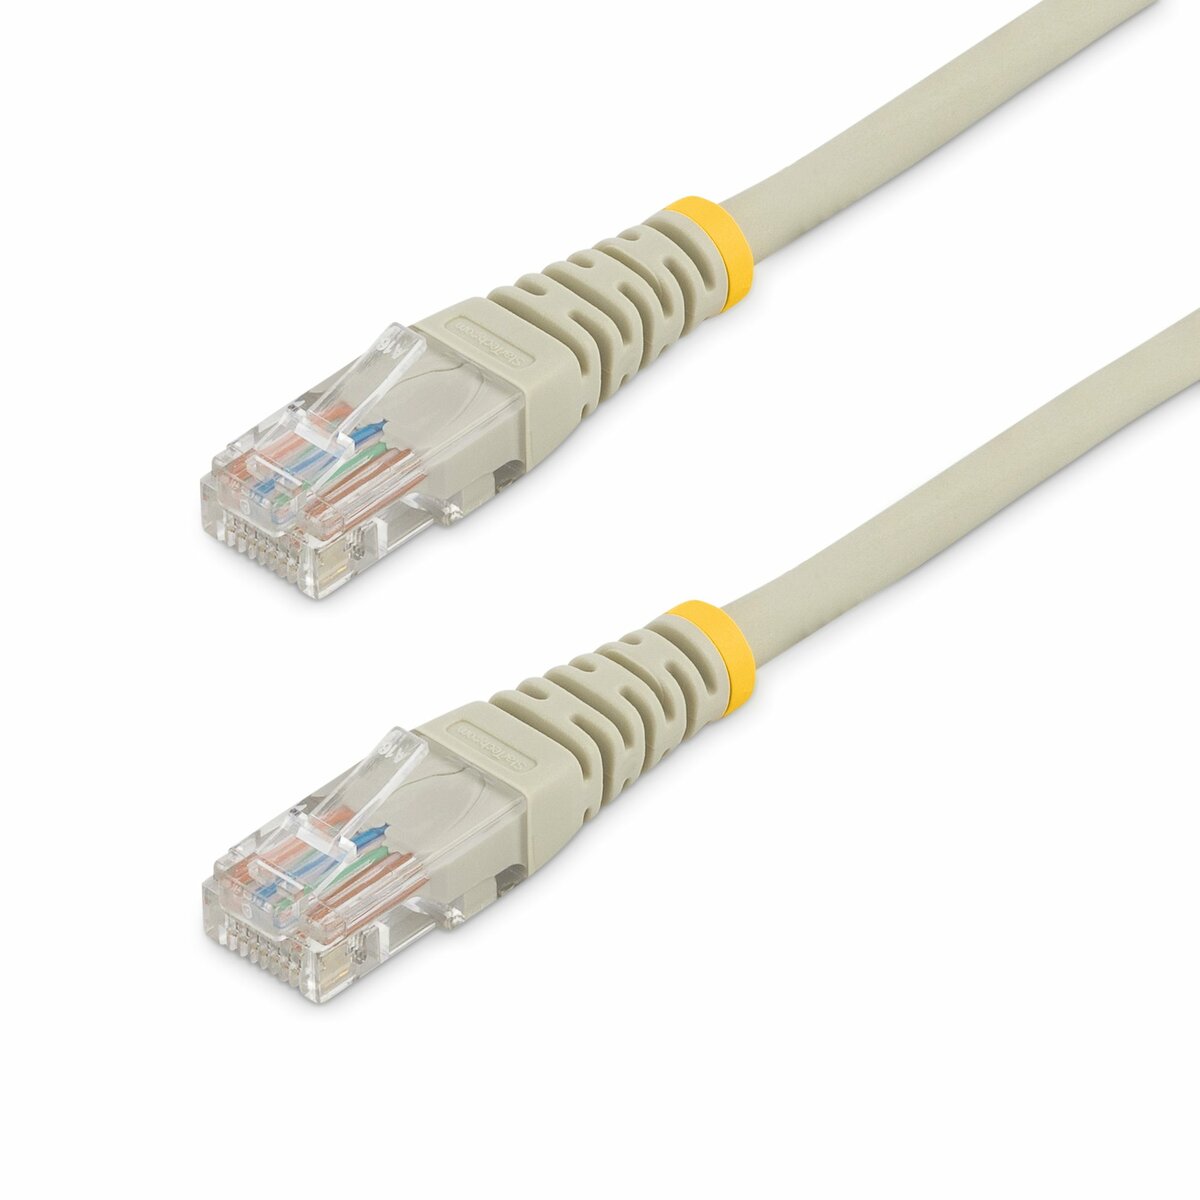 50ft (15m) LSZH CAT6 Ethernet Cable, 10 Gigabit Snagless RJ45 100W PoE  Patch Cord, CAT 6 10GbE UTP Network Cable w/Strain Relief, Blue/Fluke  Tested/ETL/Low Smoke Zero Halogen - Category 6, 24AWG 